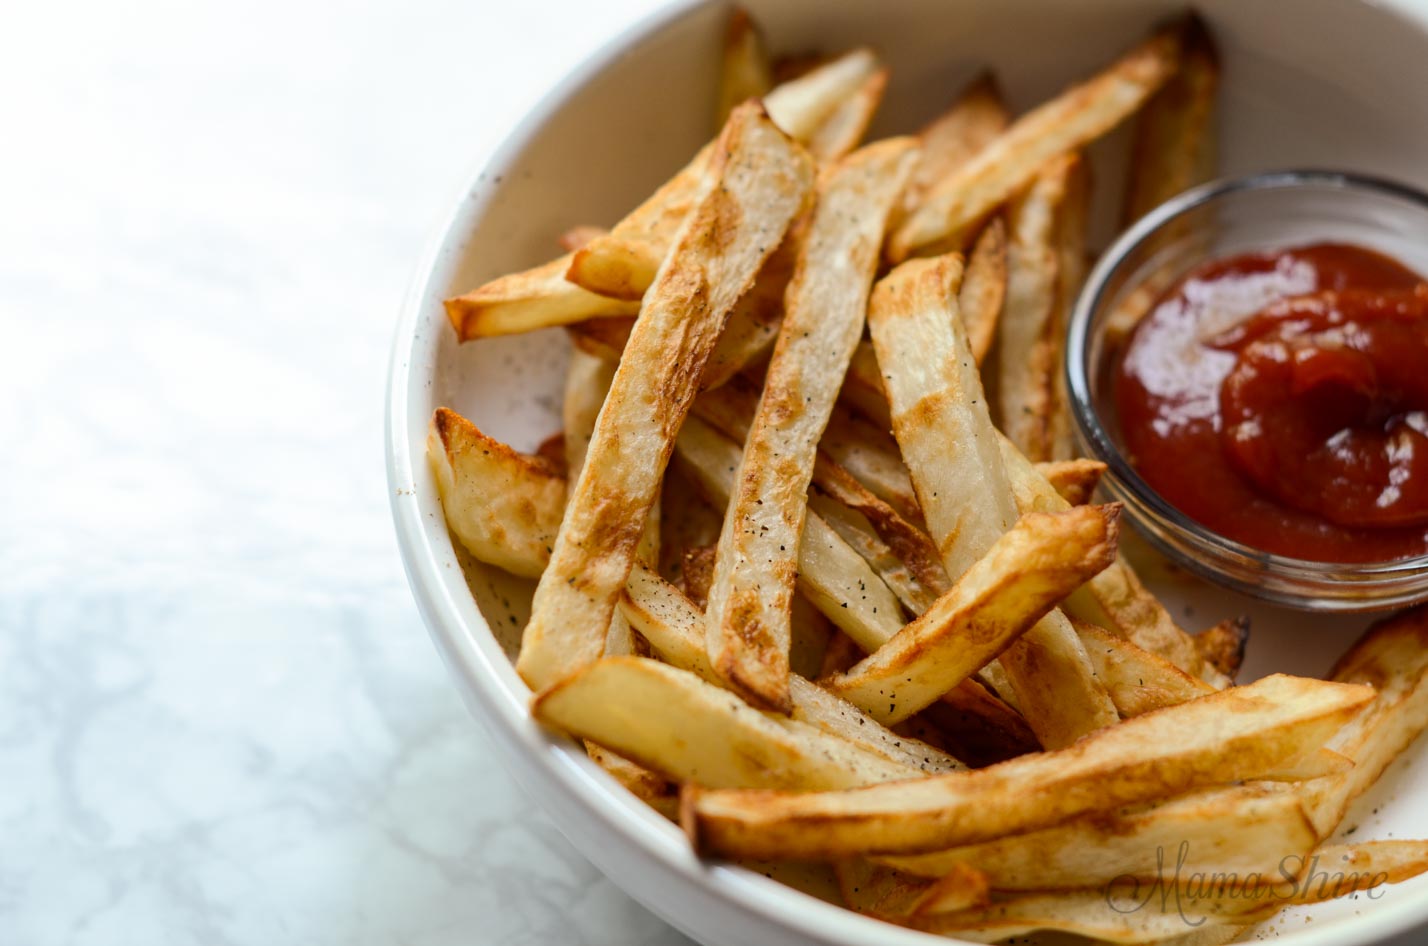 A serving of french fries and ketchup in a white bowl.